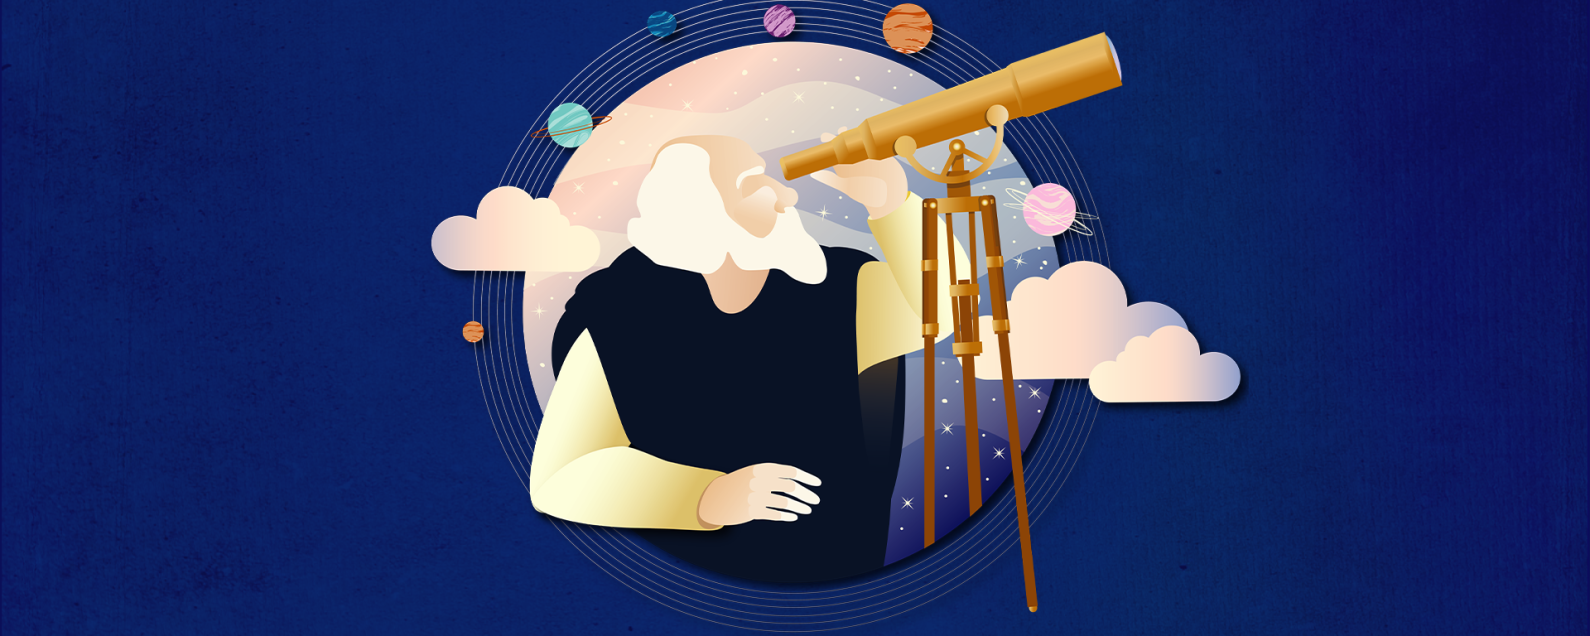 Graphic representation of astronomer Galileo Galilei looking through a telescope surrounded by planets and clouds within a circular frame.